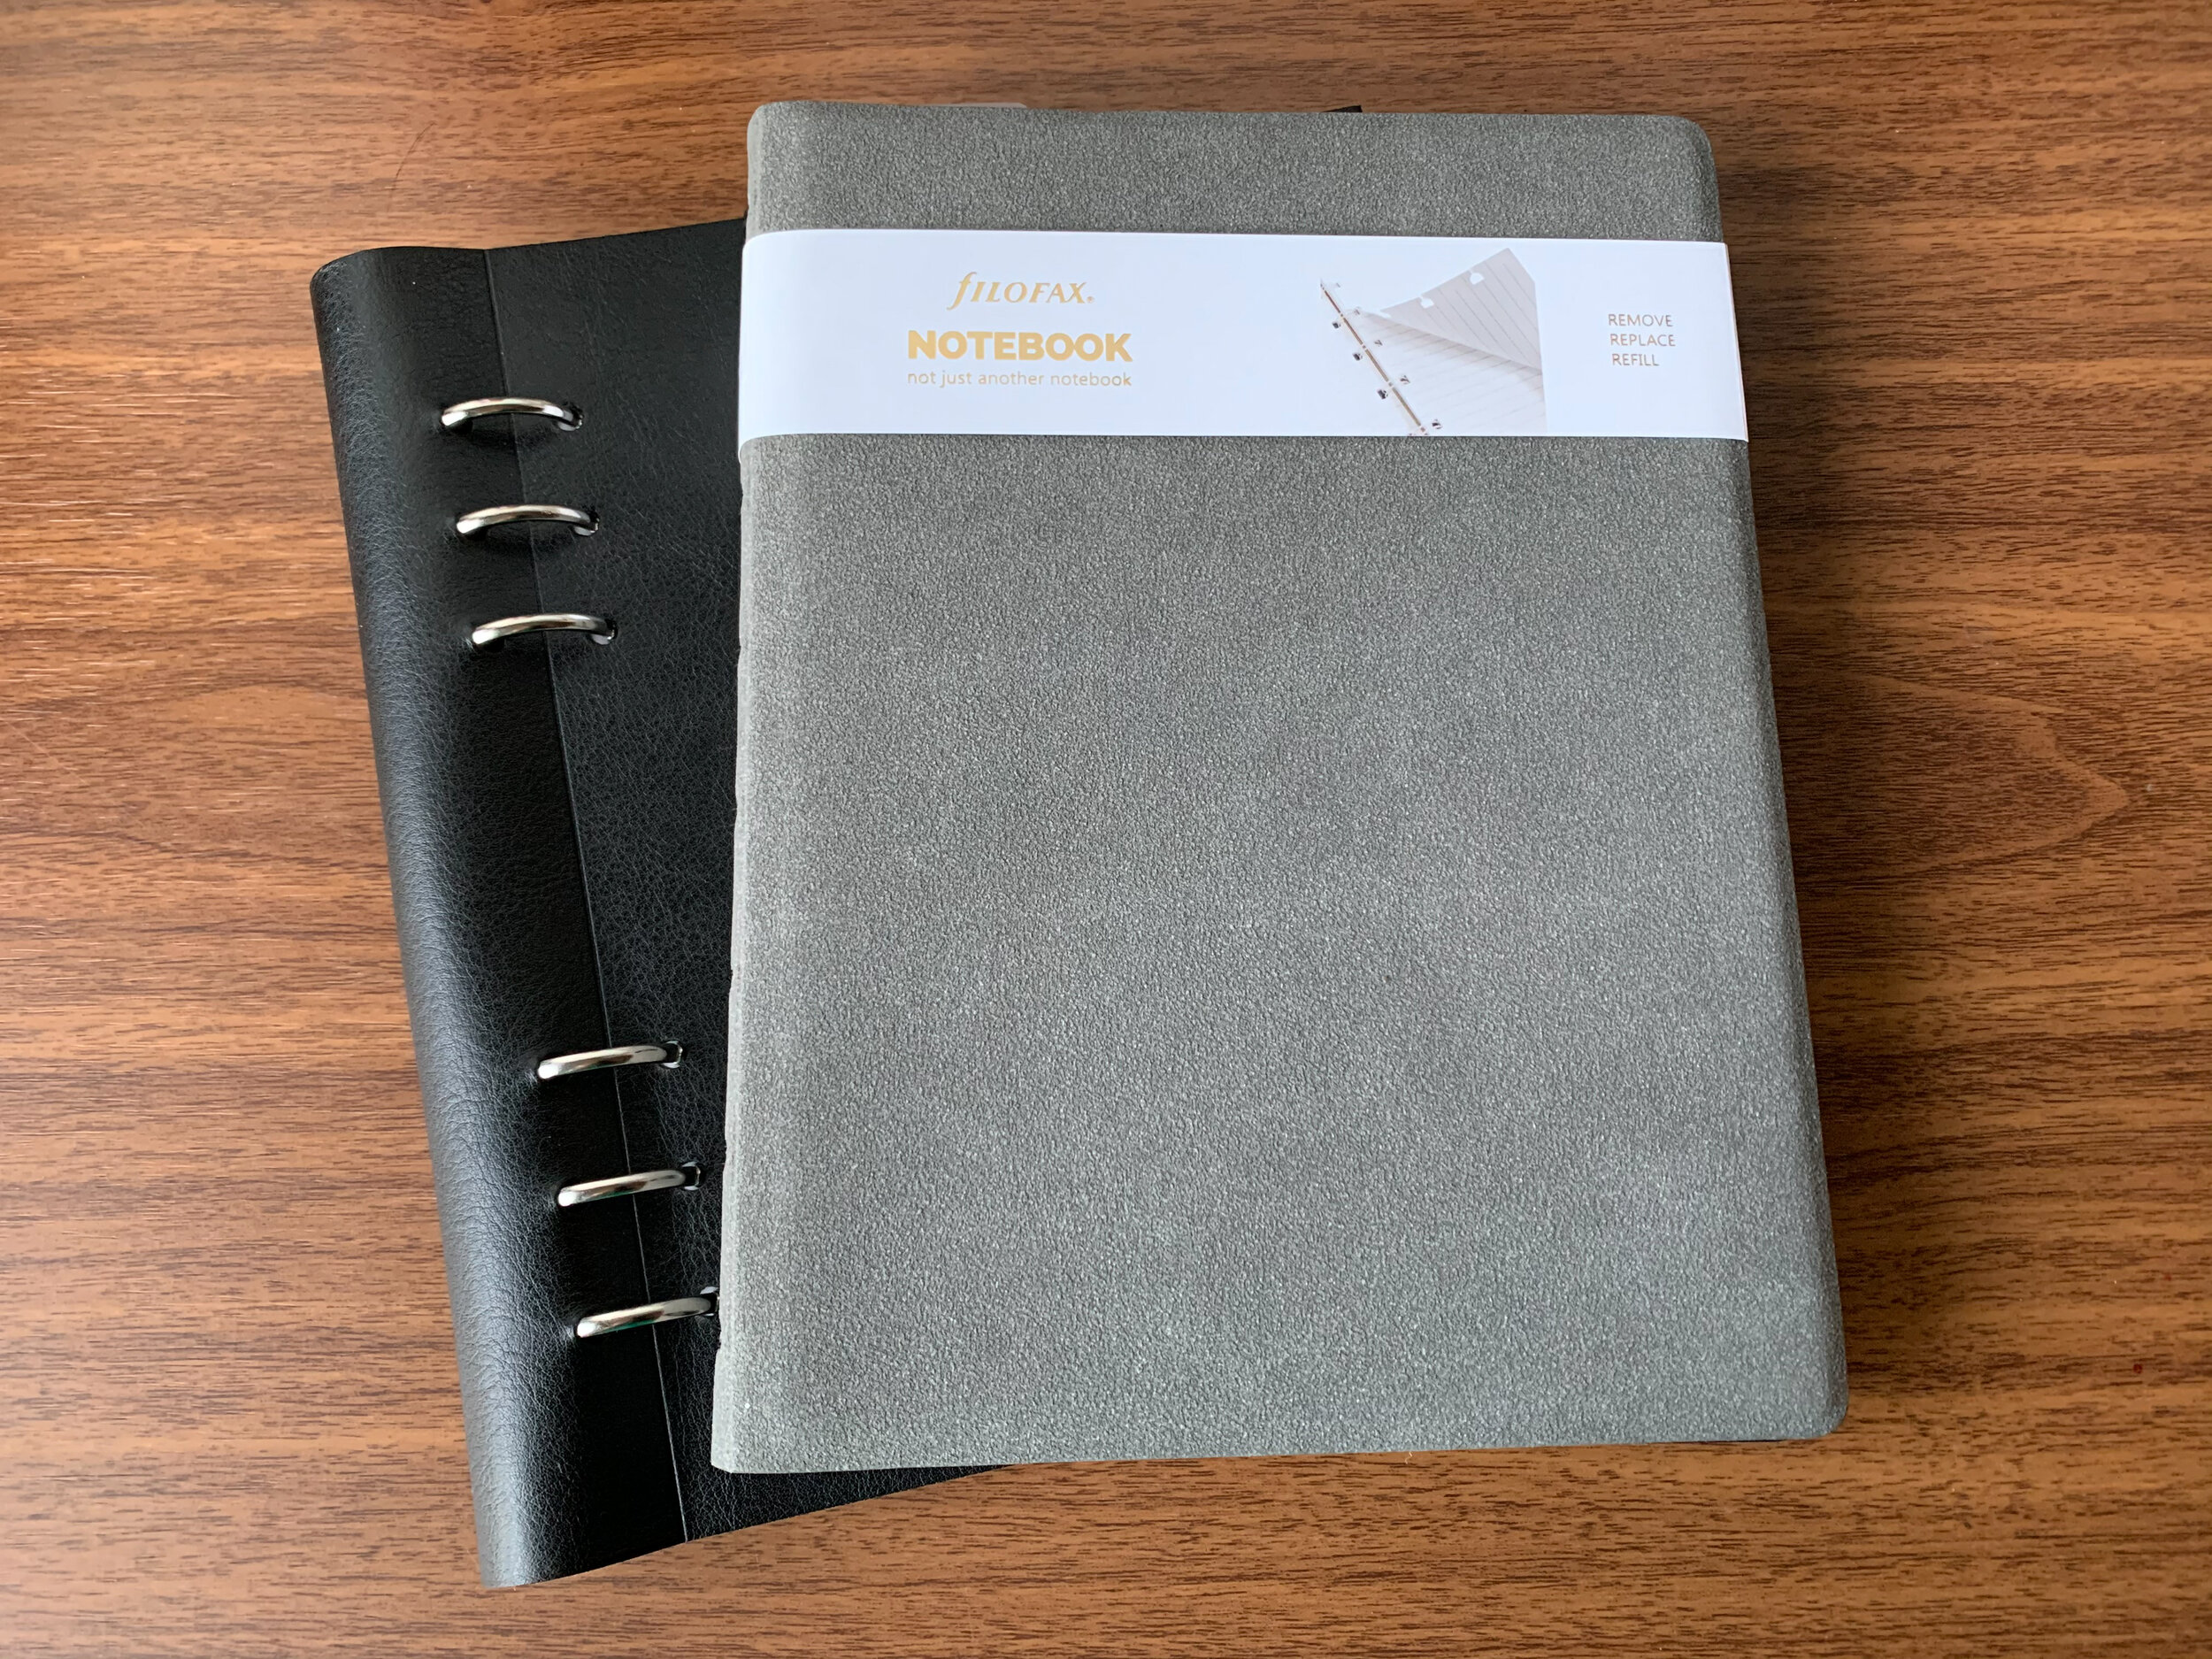 Notebook Review: Filofax Notebook and Clipbook — The Gentleman Stationer